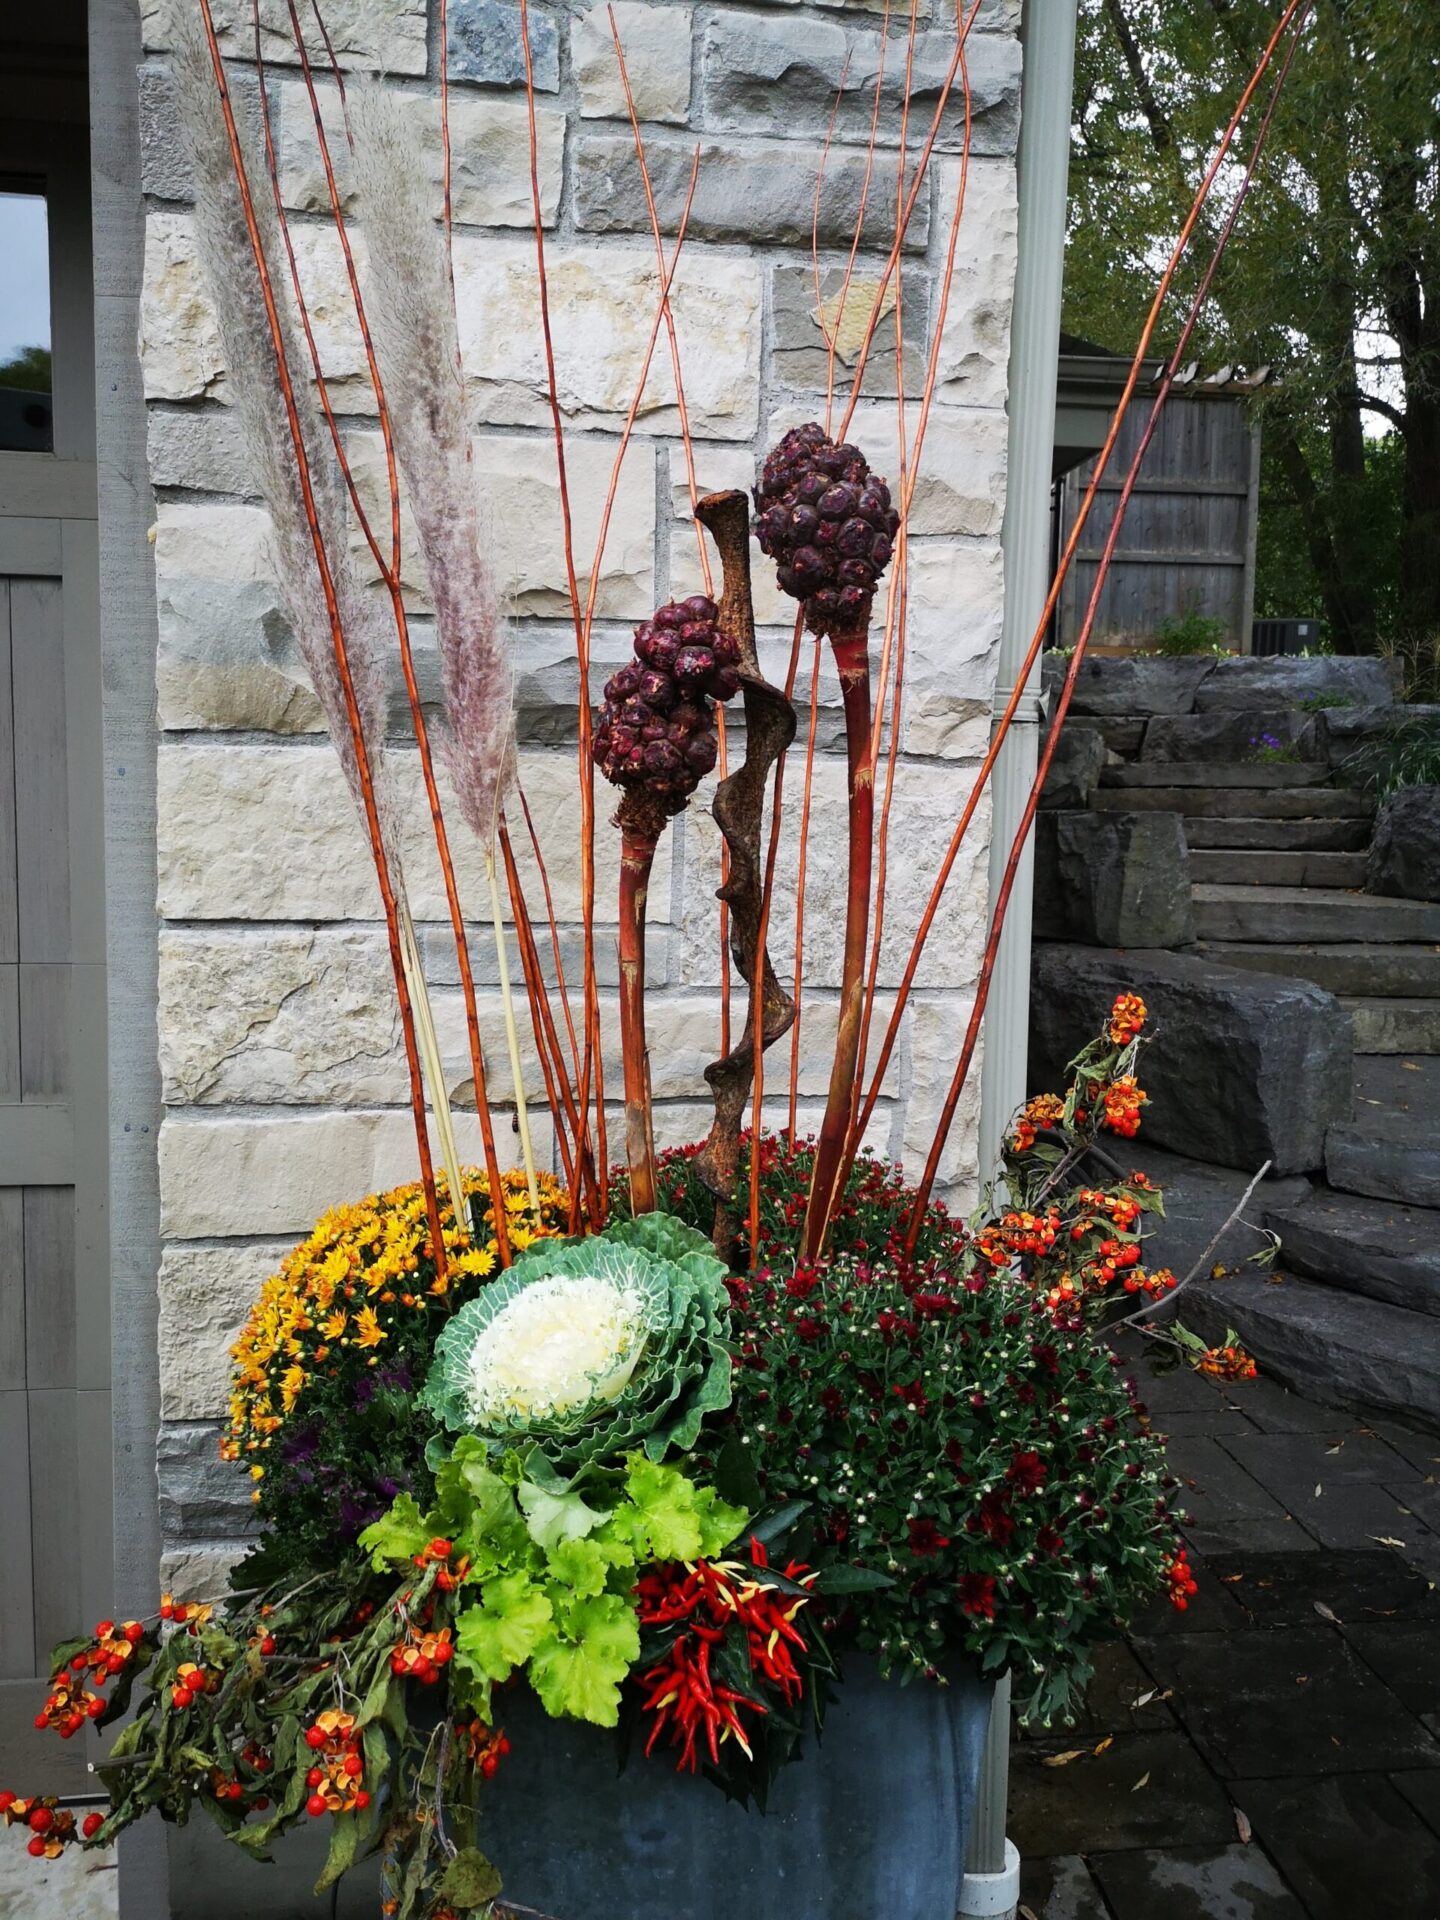 Outdoor autumn display with decorative cabbage, colorful flowers, and ornamental grasses in a large pot. Abstract sculptures resembling people with pinecone textures are behind.